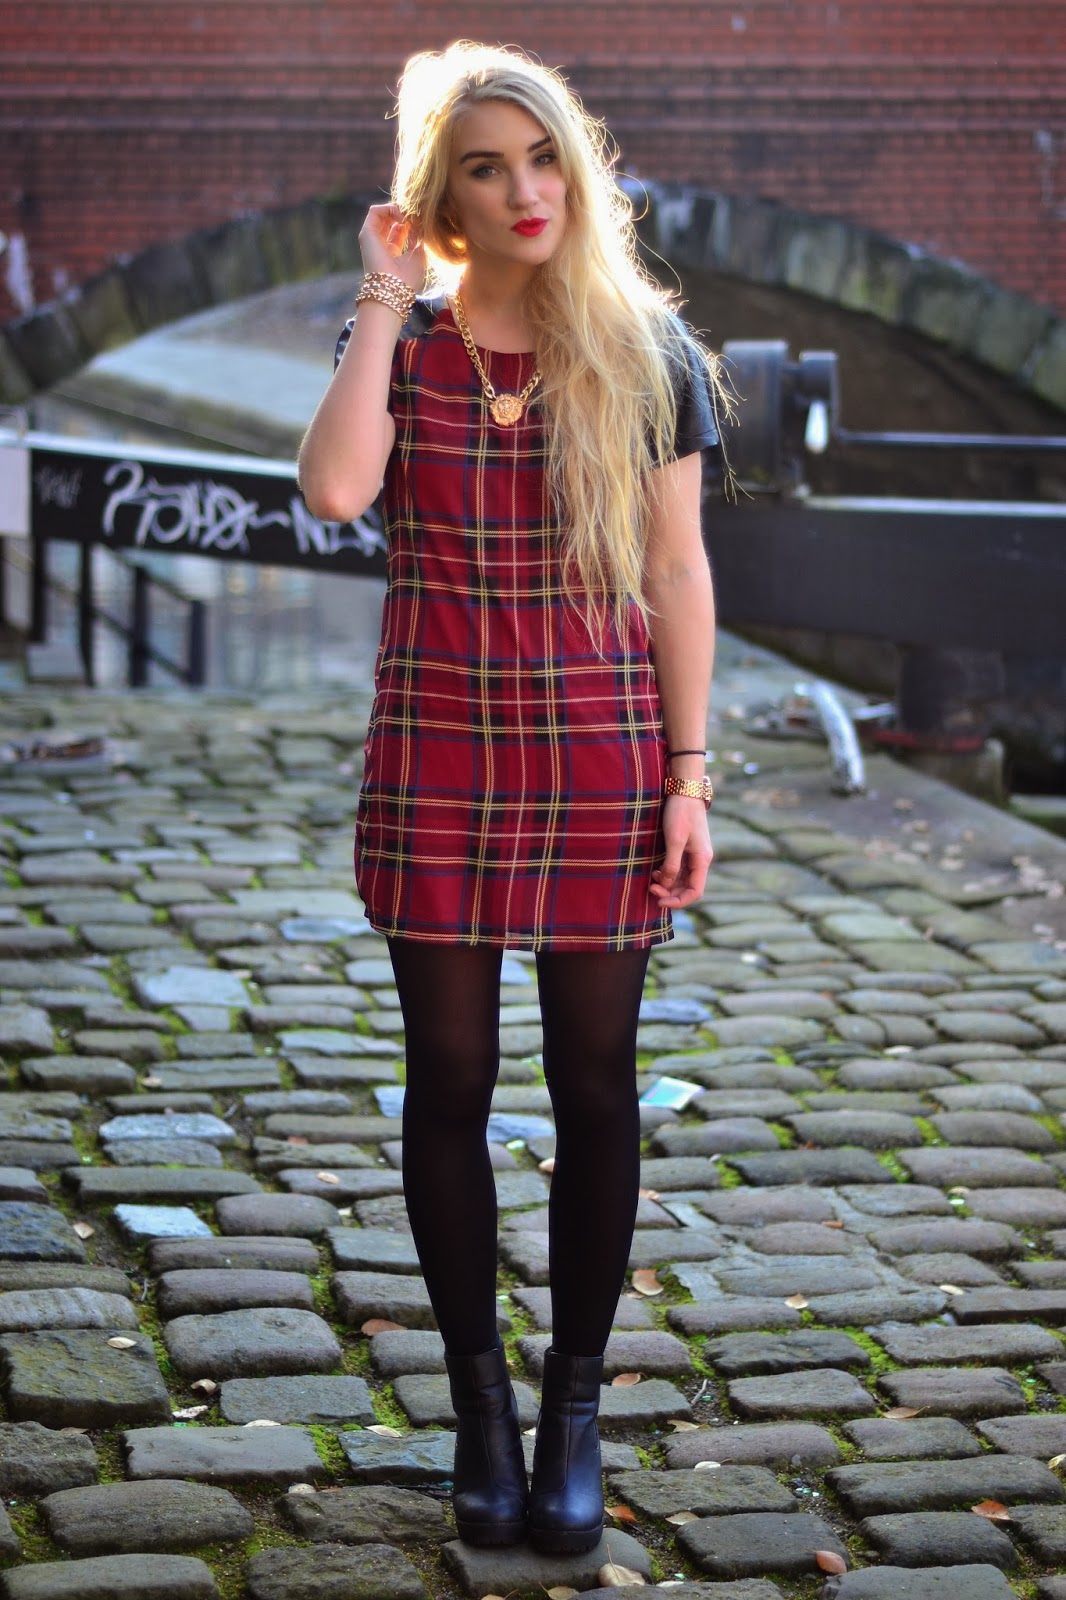 Tartan   Pattern That Never Goes Out of Fashion